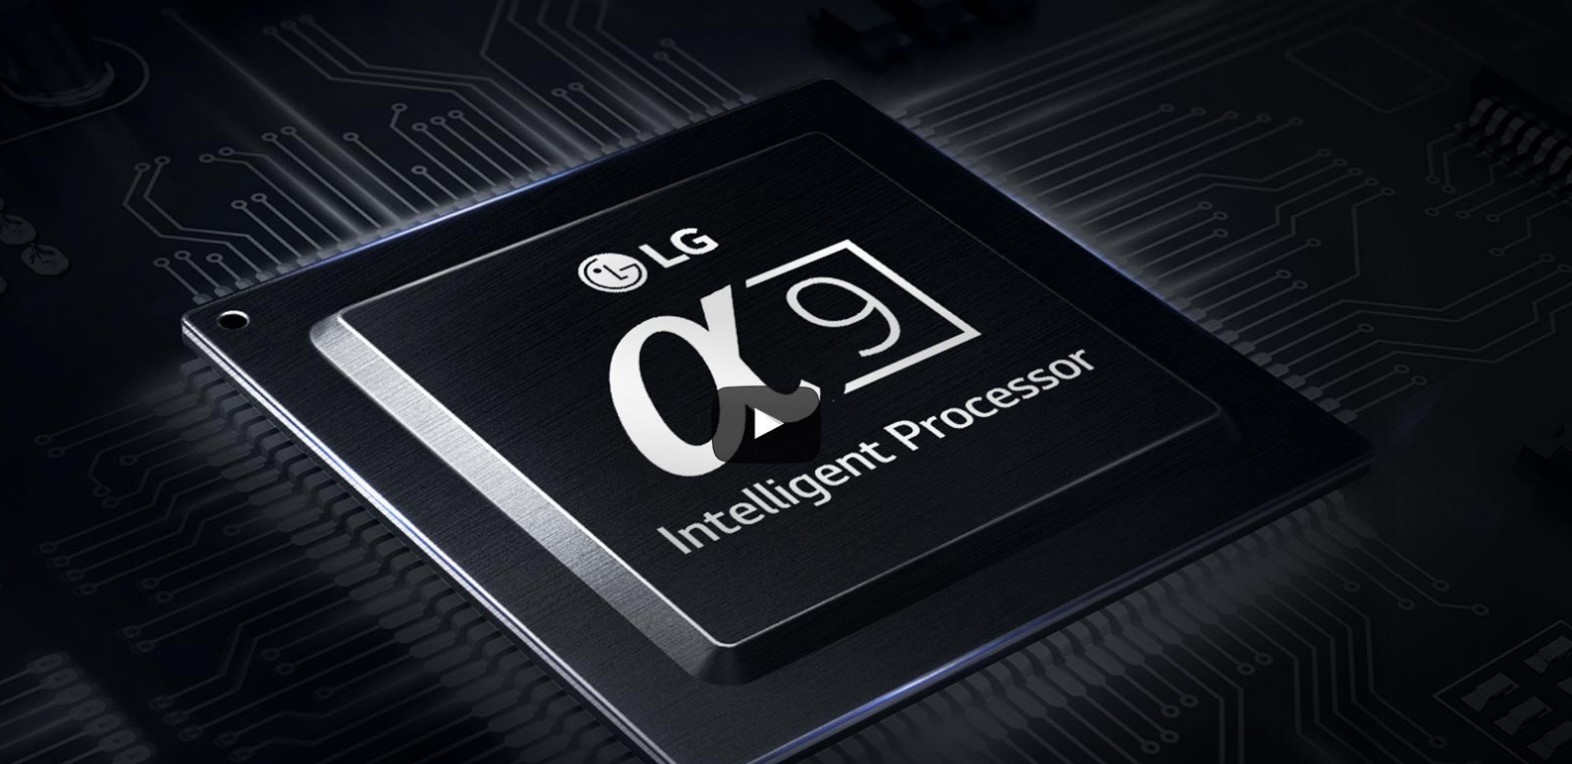 A video clip to introduce the technological advances of LG's new Alpha 9 Intelligent Processor